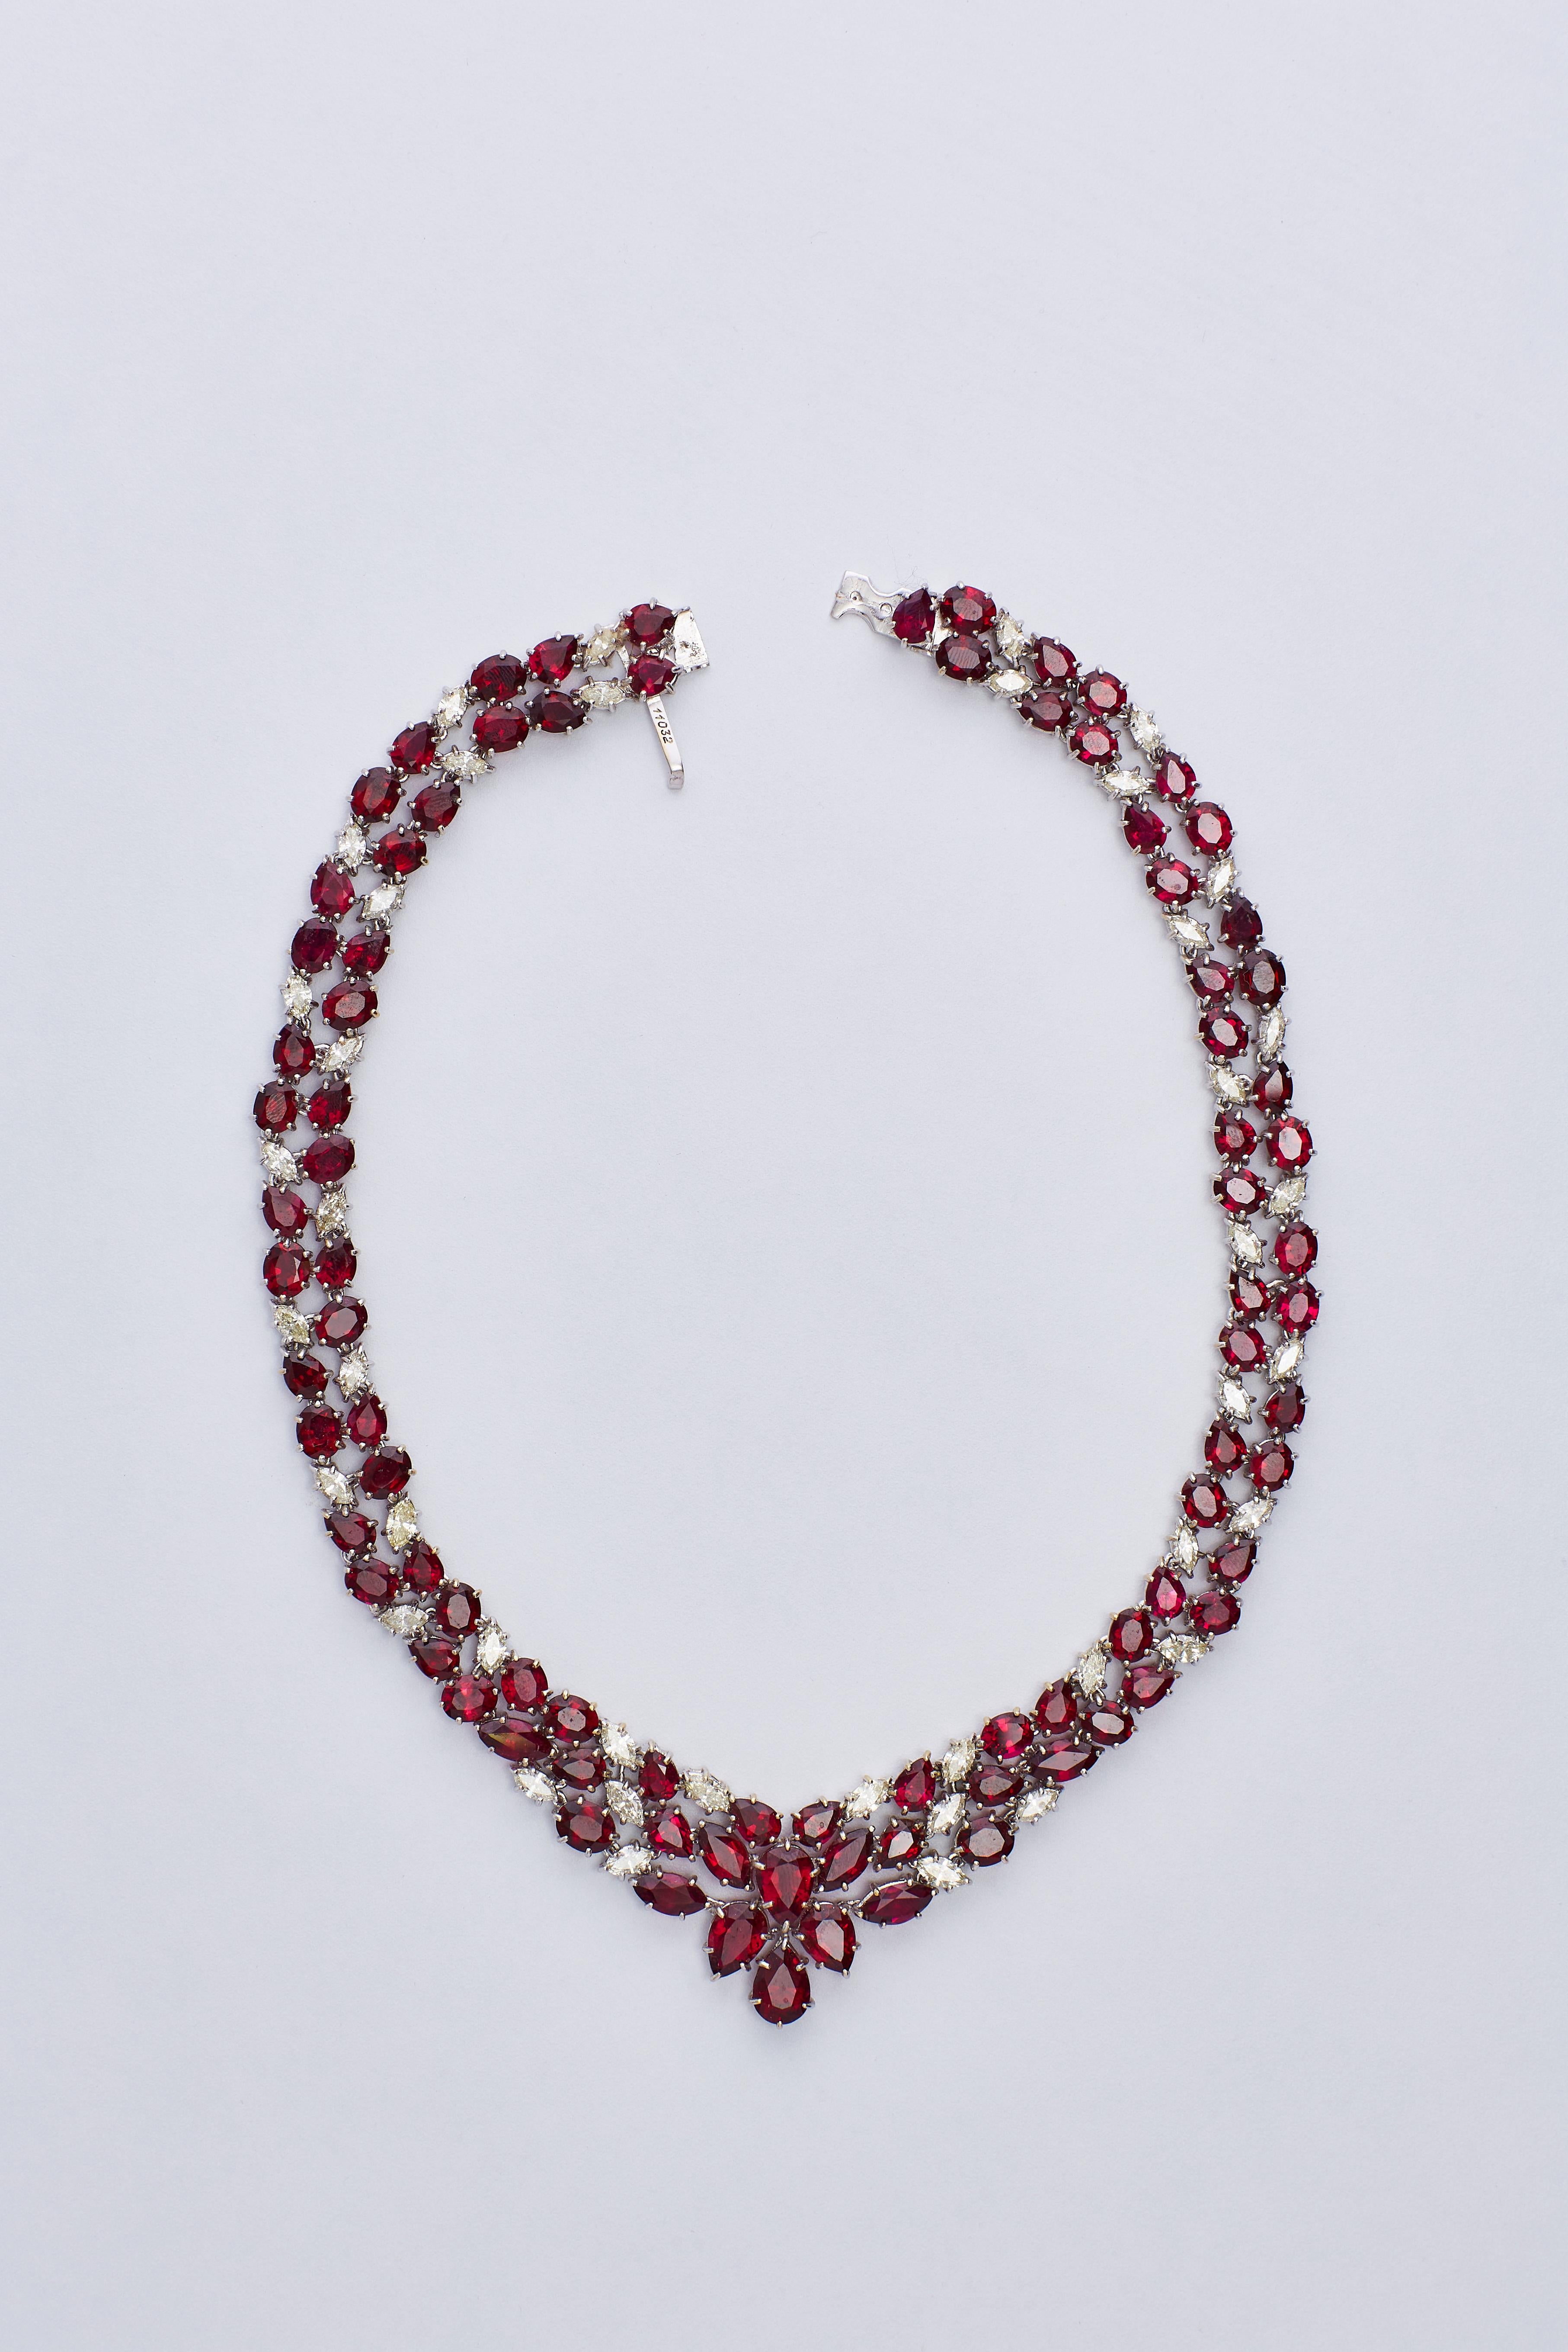 18 Karat White Gold Ruby and Diamond Necklace (Collier)

Incredible collier with 89 Rubies in different sizes and cuts (oval, pear) and 42 Marquise Diamonds.
26 carat of rubies, 28.80 carat of F VS1 diamonds.
Total Weight: 130 grams.